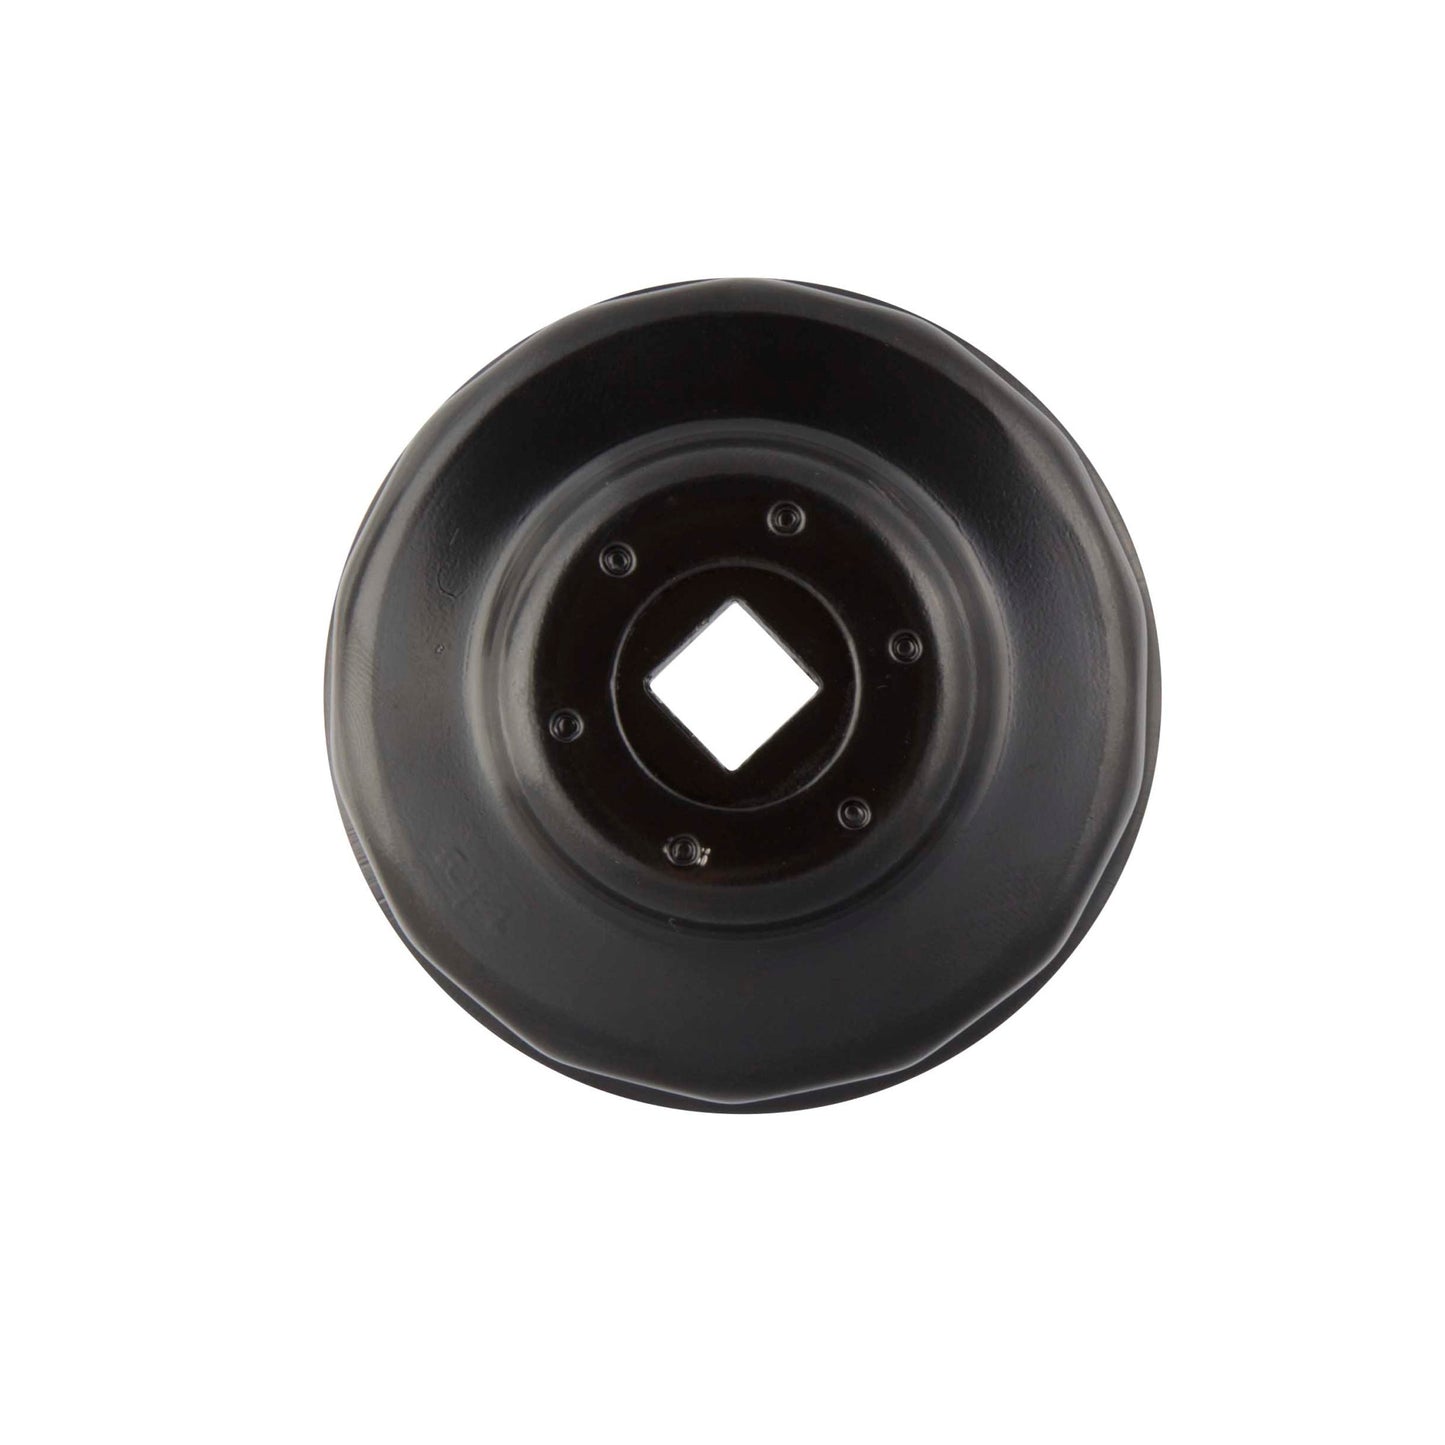 Oil Filter Cap Wrench 65mm x 14 Flute